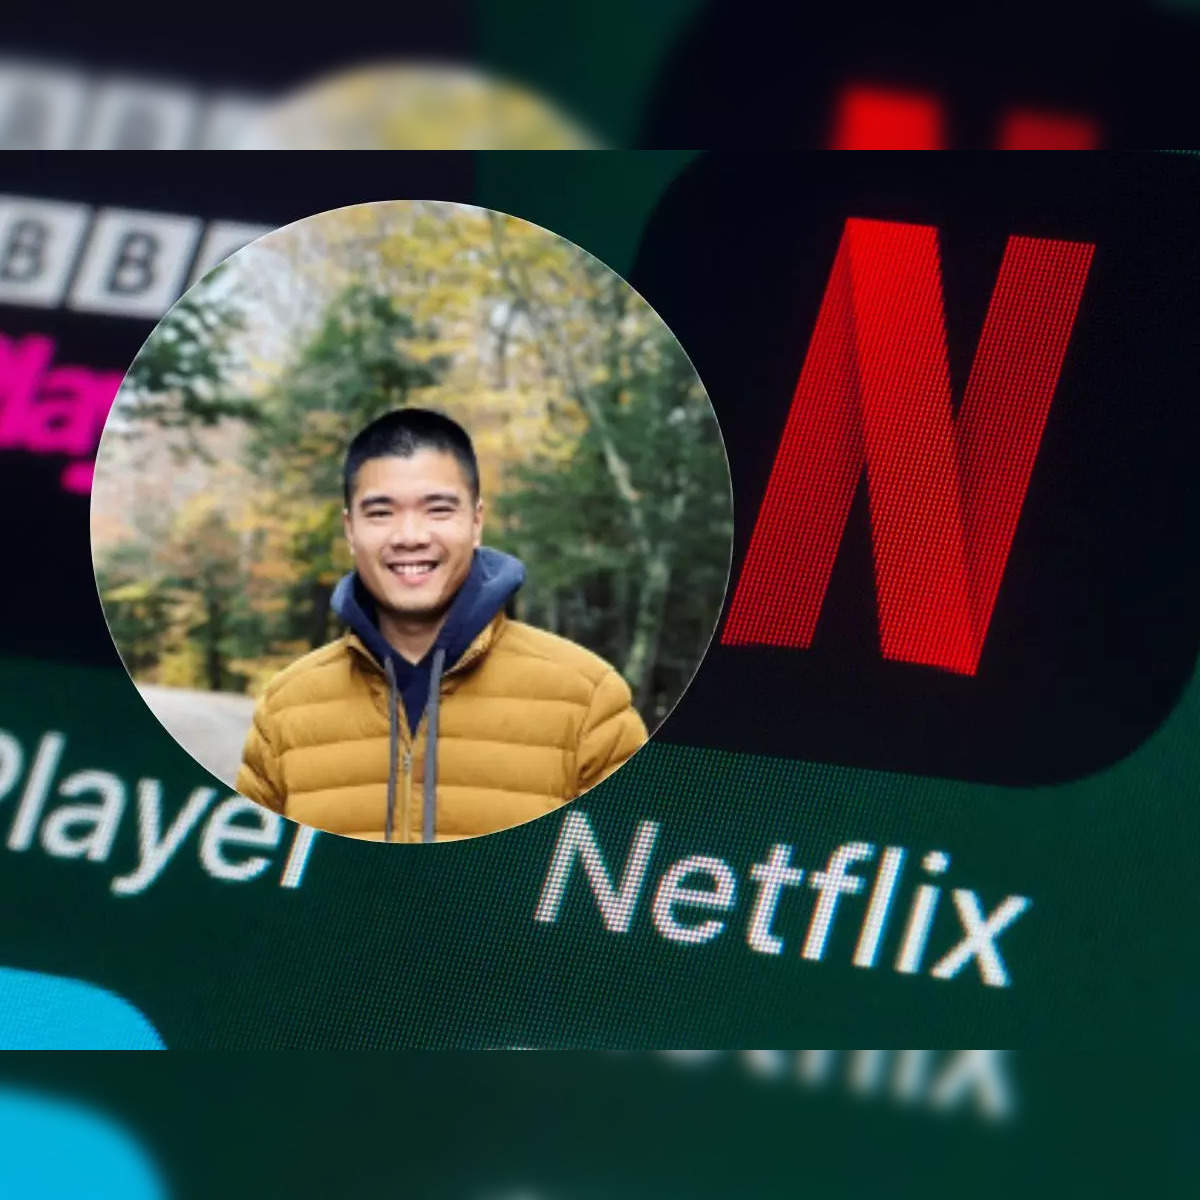 netflix: 'Golden handcuffs.' Here's why this engineer quit his Rs 3.5 crore  job at Netflix - The Economic Times